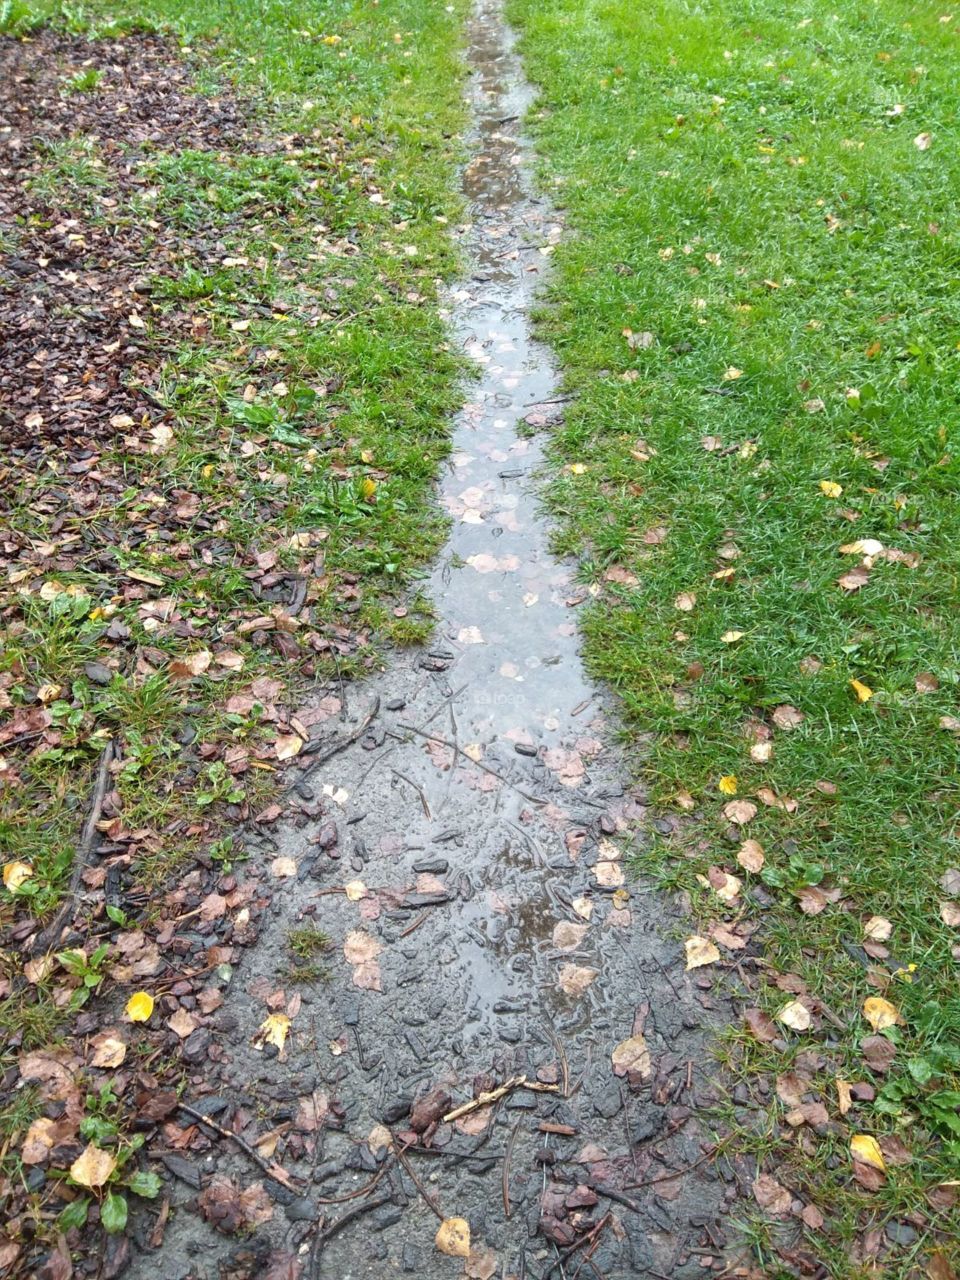 Muddy path with colored leaves and a puddle